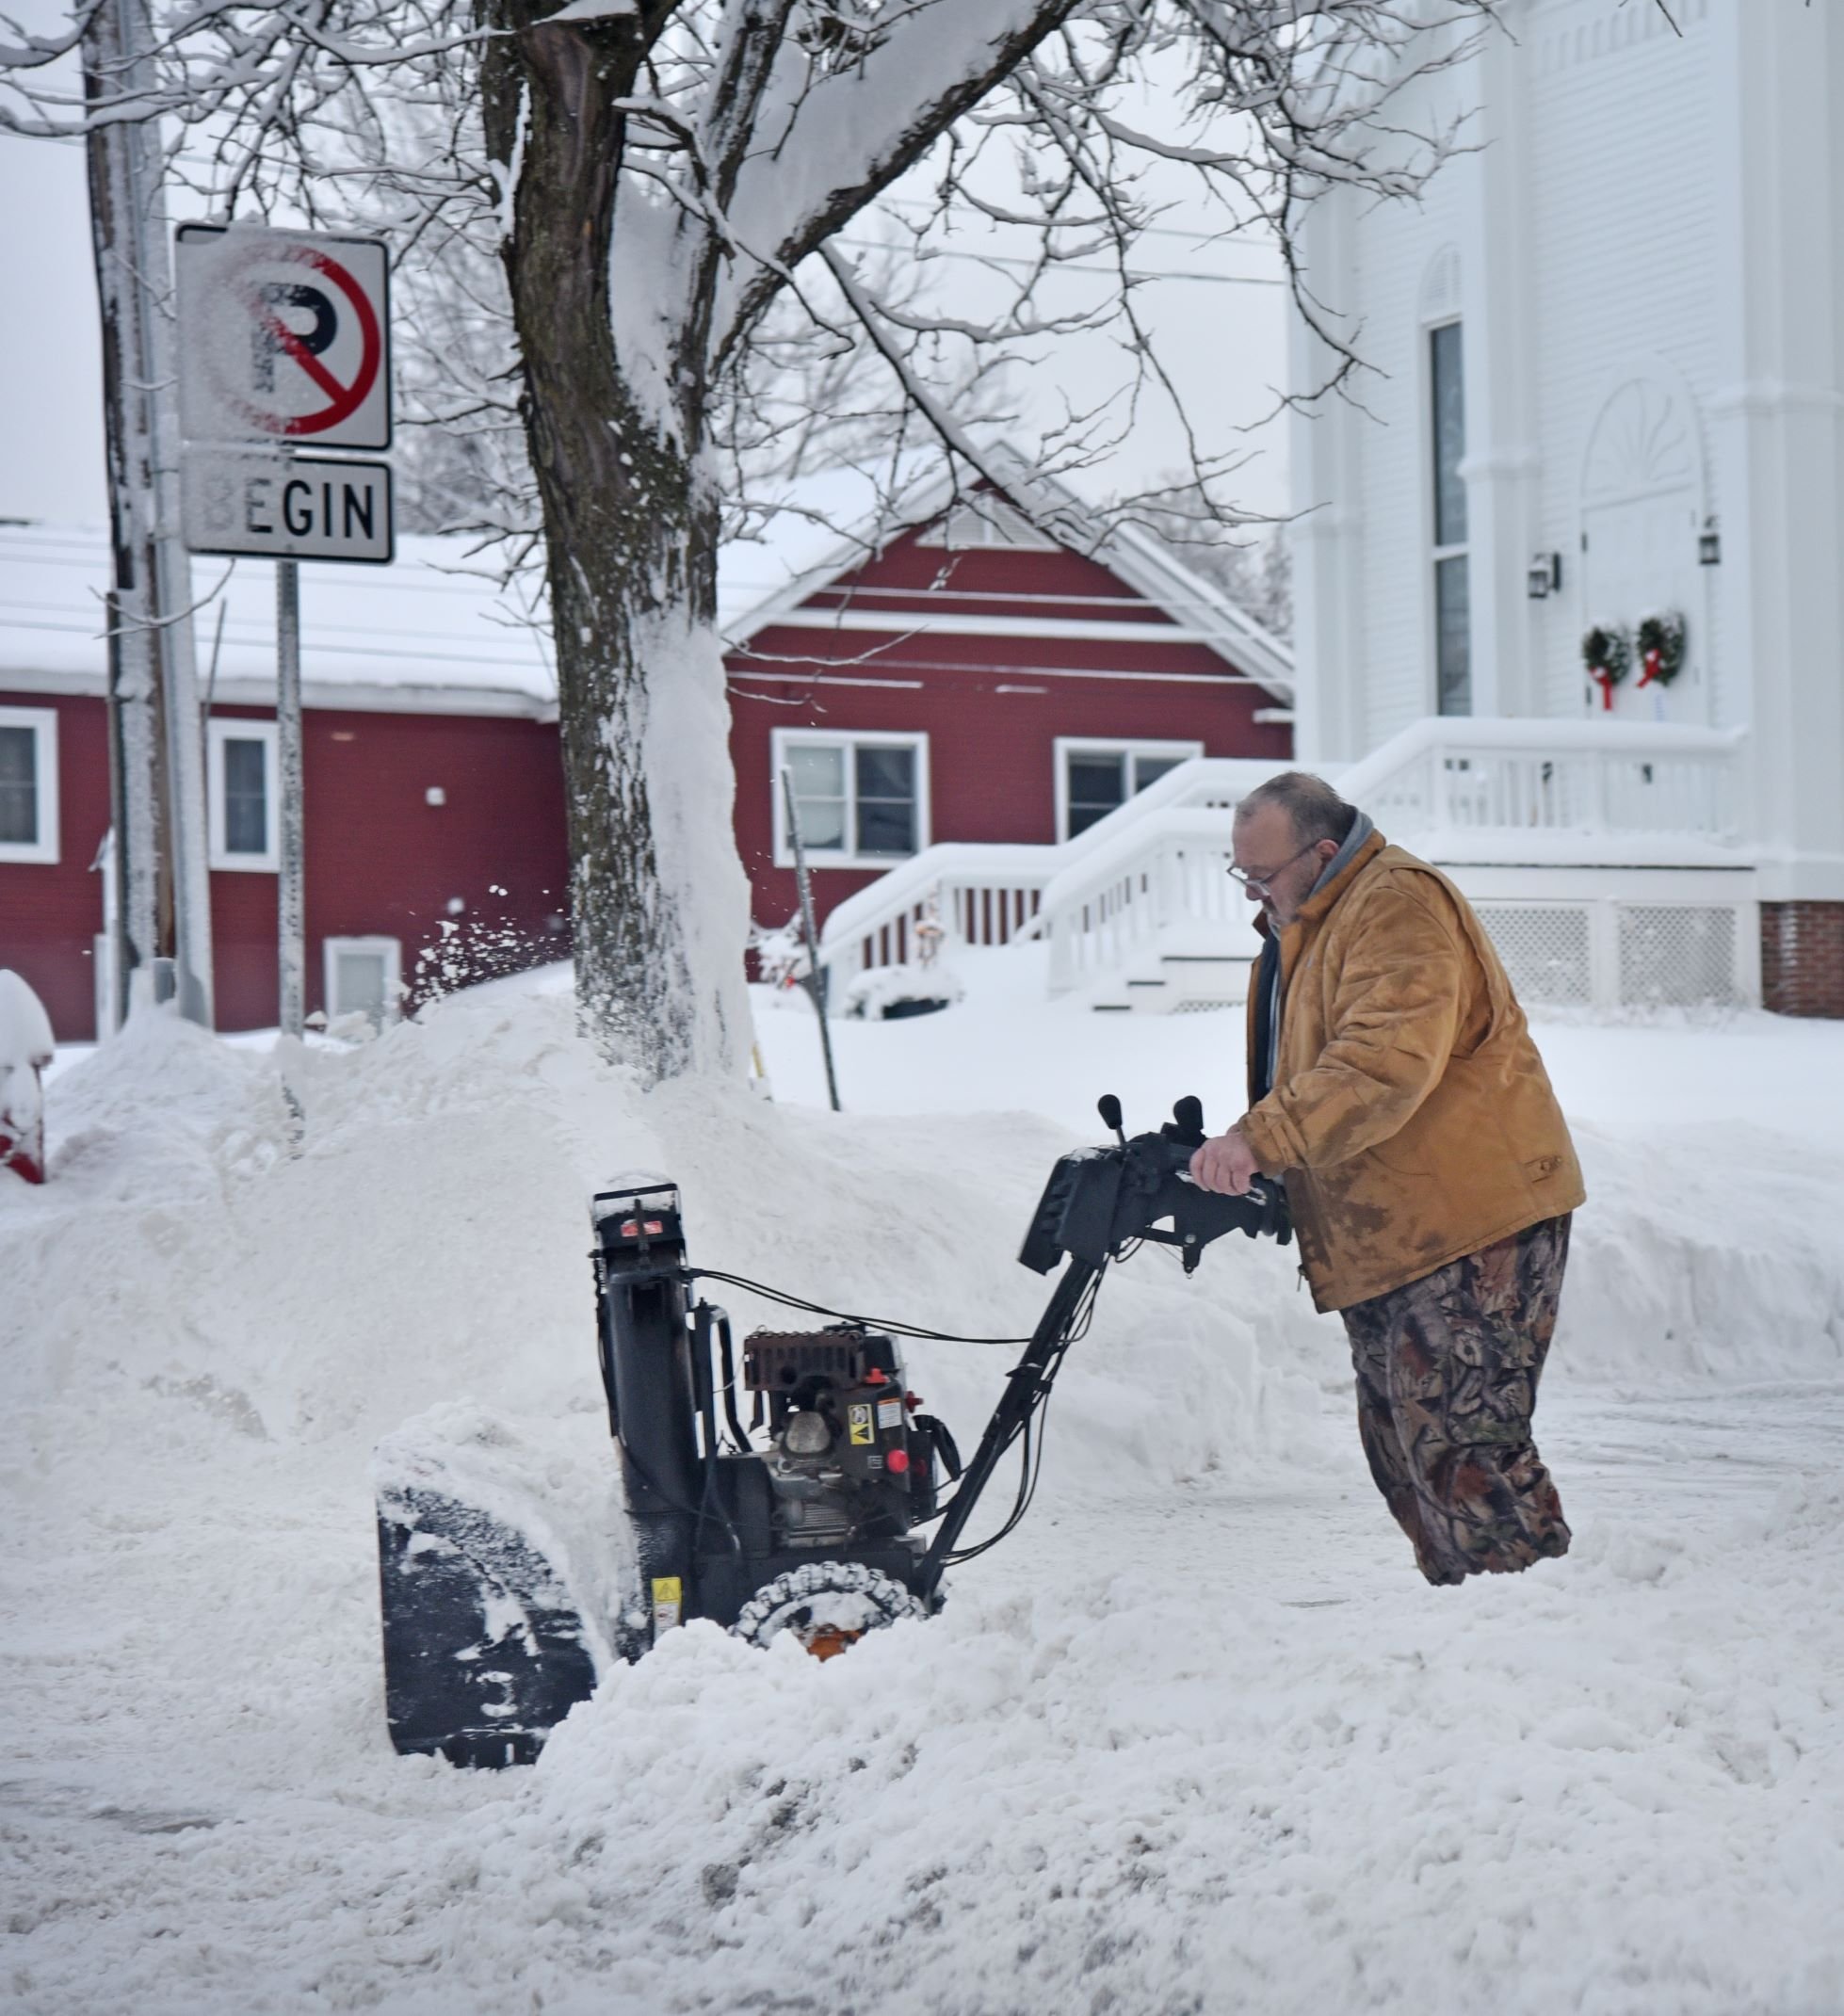  Andy Fuller on North Main fires up the snowblower to clear the driveway near the Congregational Church. Photo by Gordon Miller 